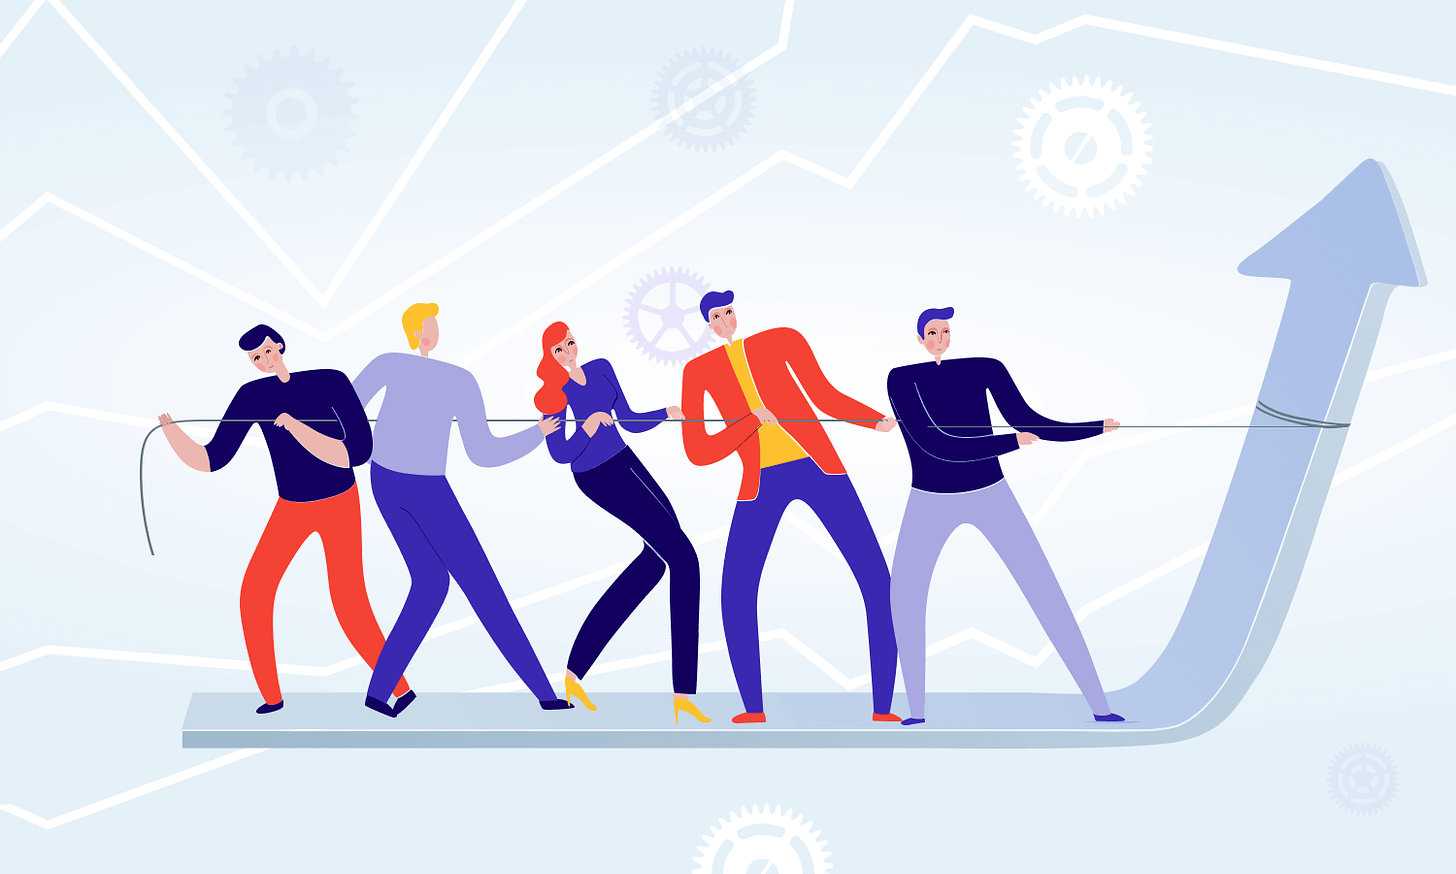 5 Types of Teams. What's Your Choice? | Hygger.io